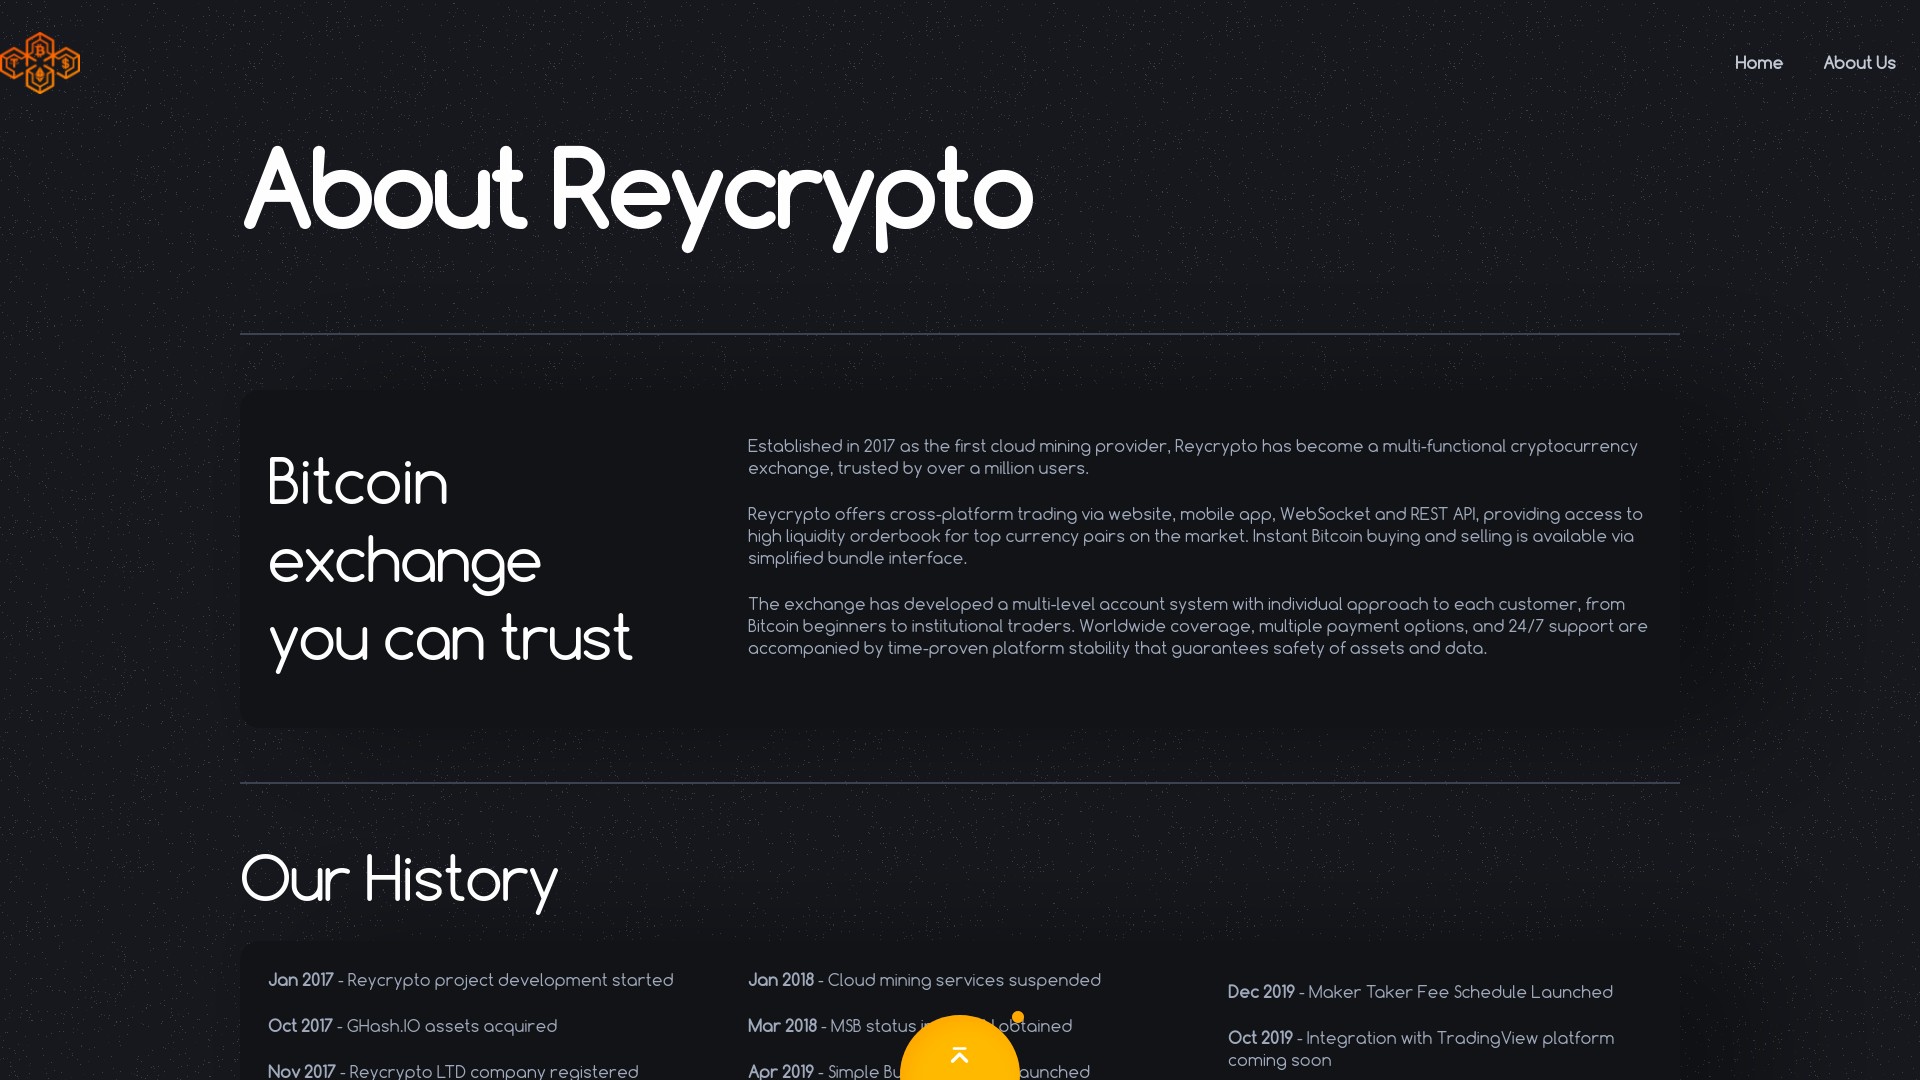 About Reycrypto located at reycrypto.com